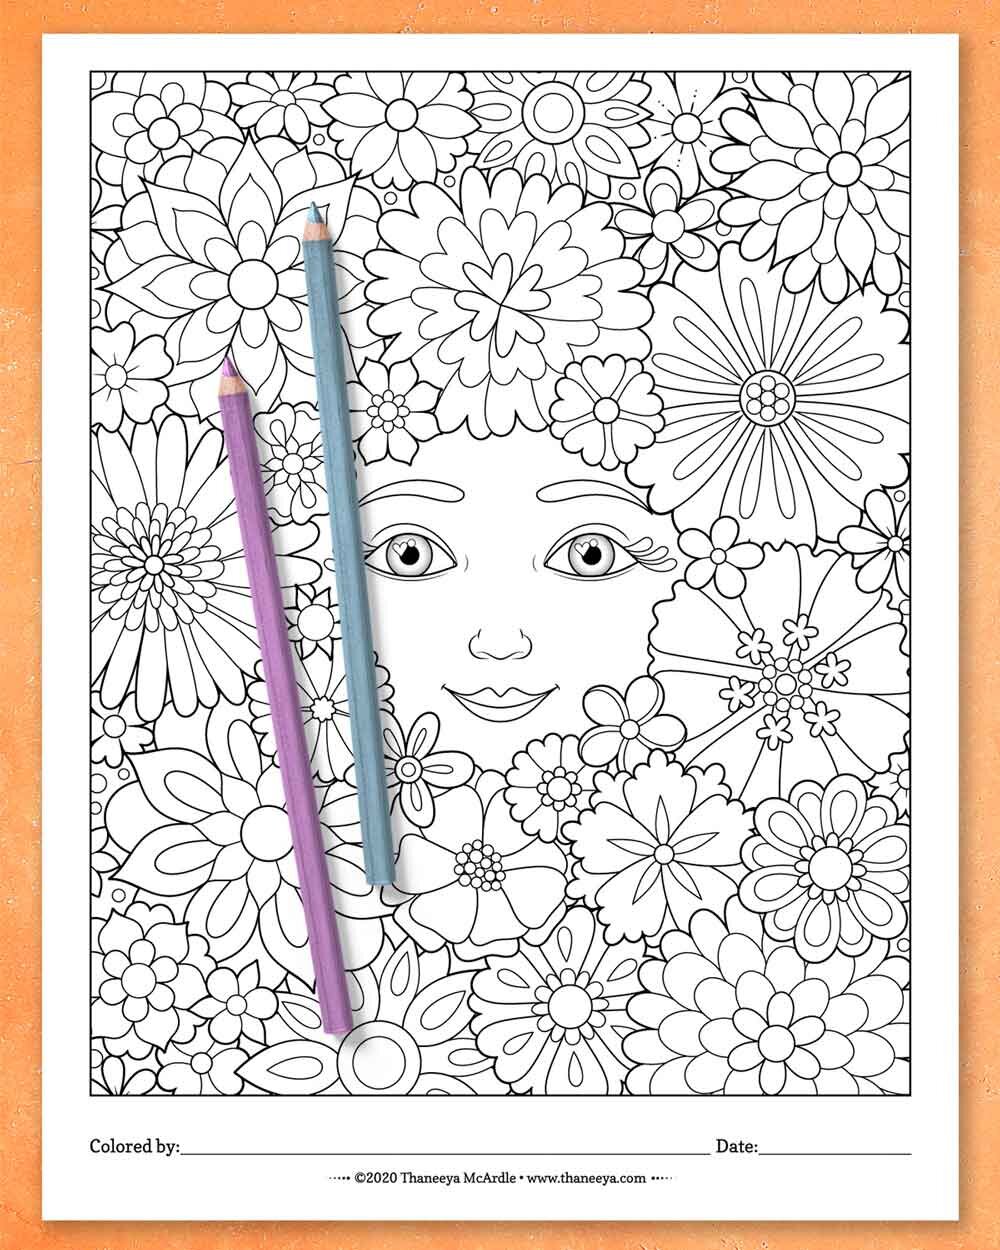 Face surrounded by flowers - Coloring Page by Thaneeya McArdle - Set of 10 printable coloring pages to download and color!